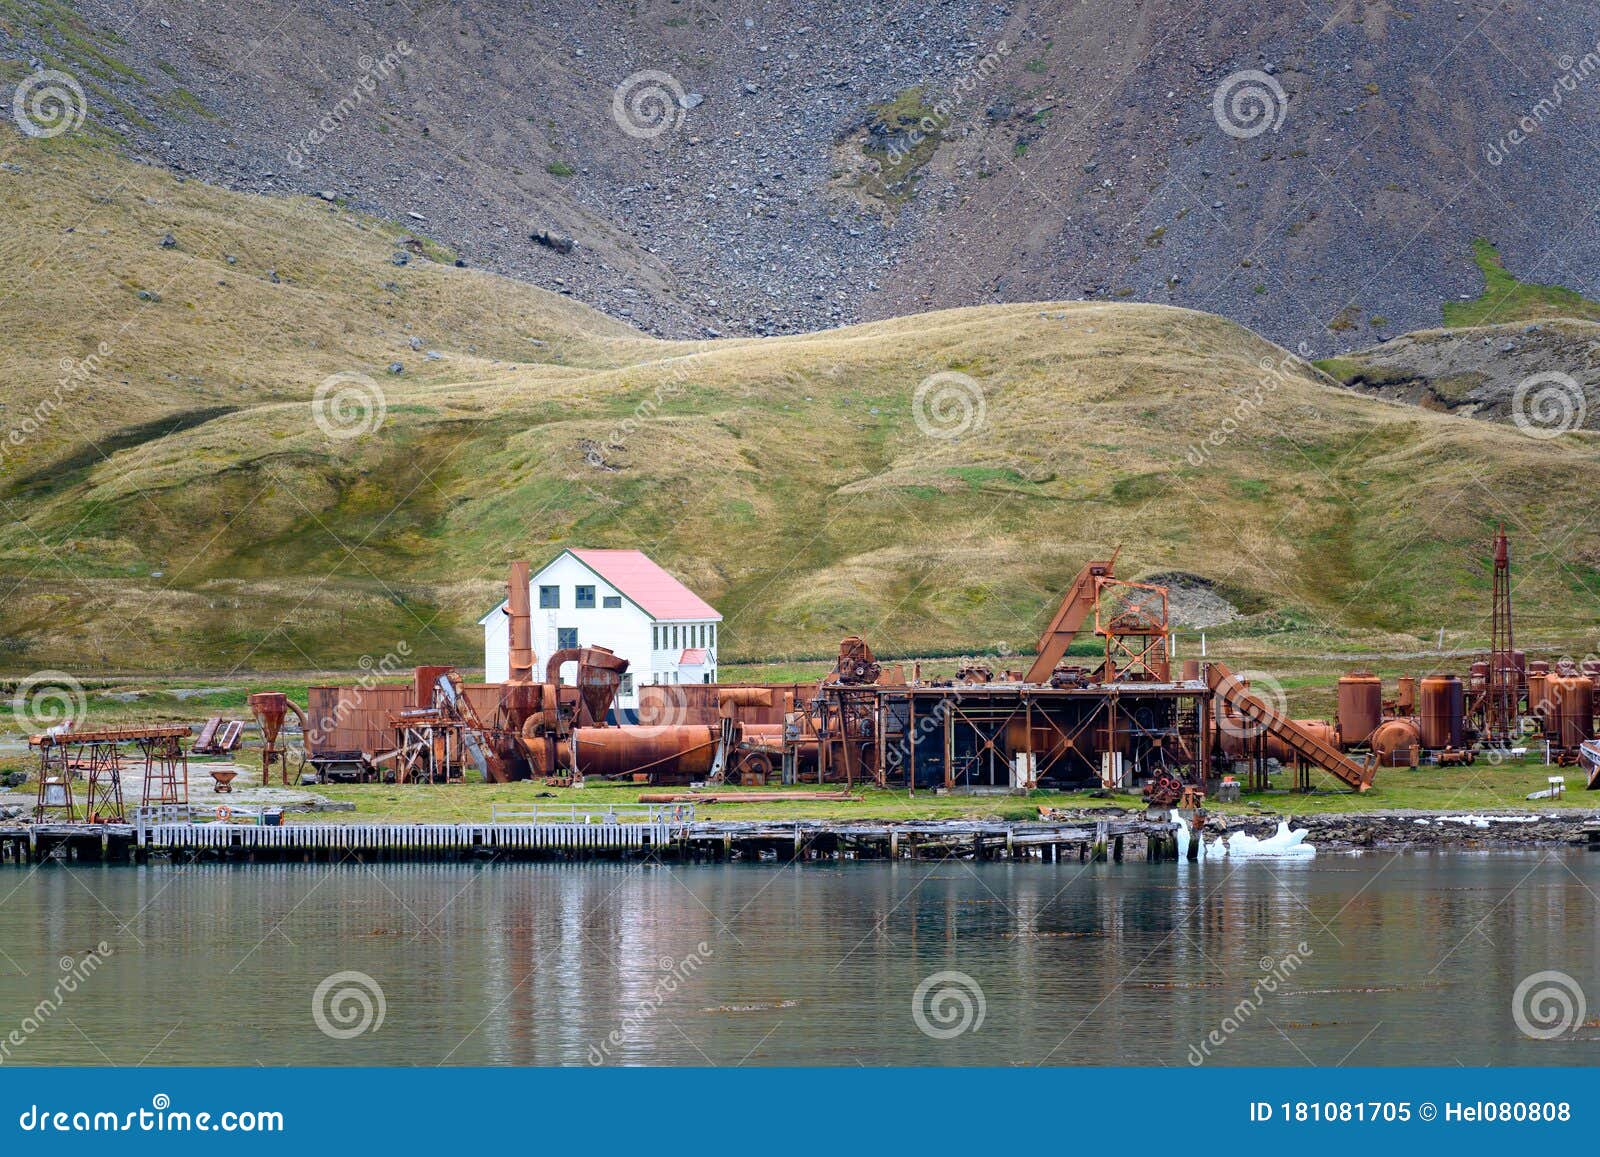 grytviken rusty steel tanks of abandoned whaling station in south georgia. lost places with rusty tanks, old boats, antarctica.